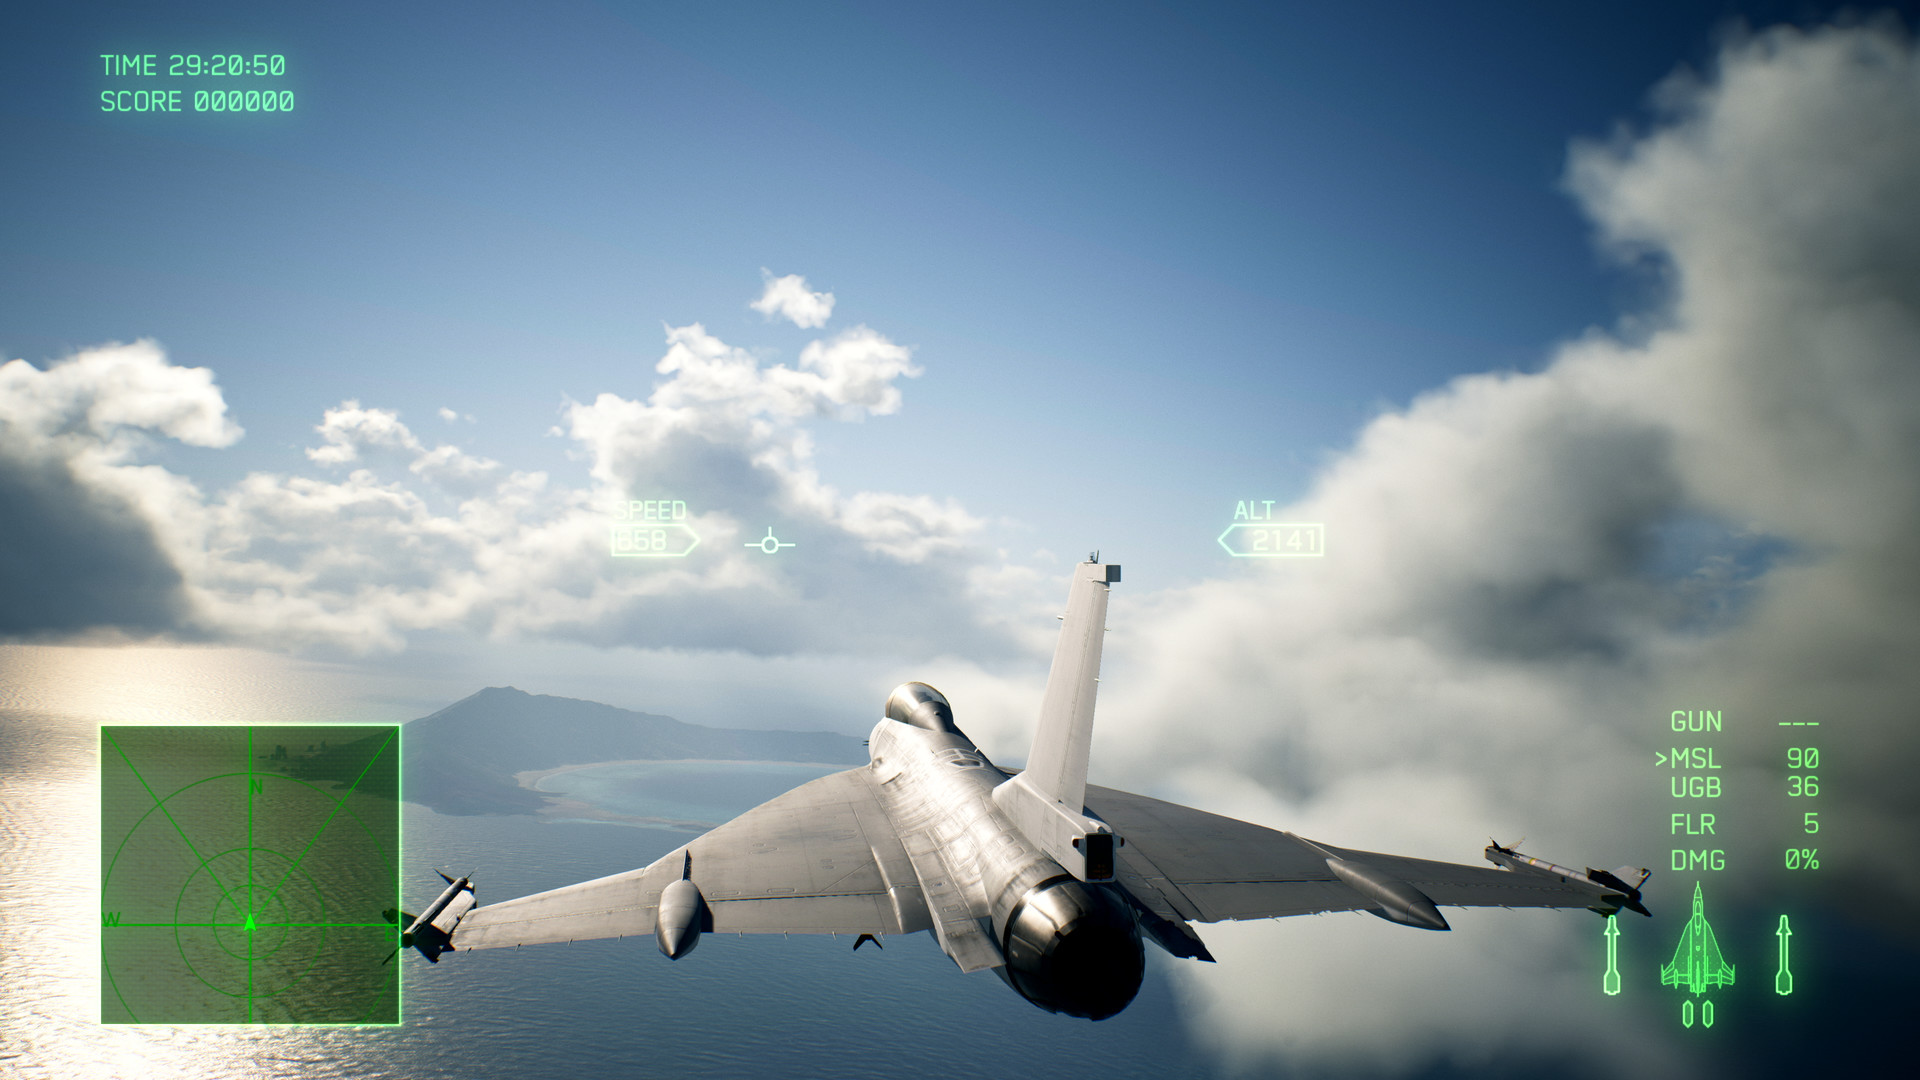 Ace Combat 7: Skies Unknown - Unexpected Visitor - Metacritic